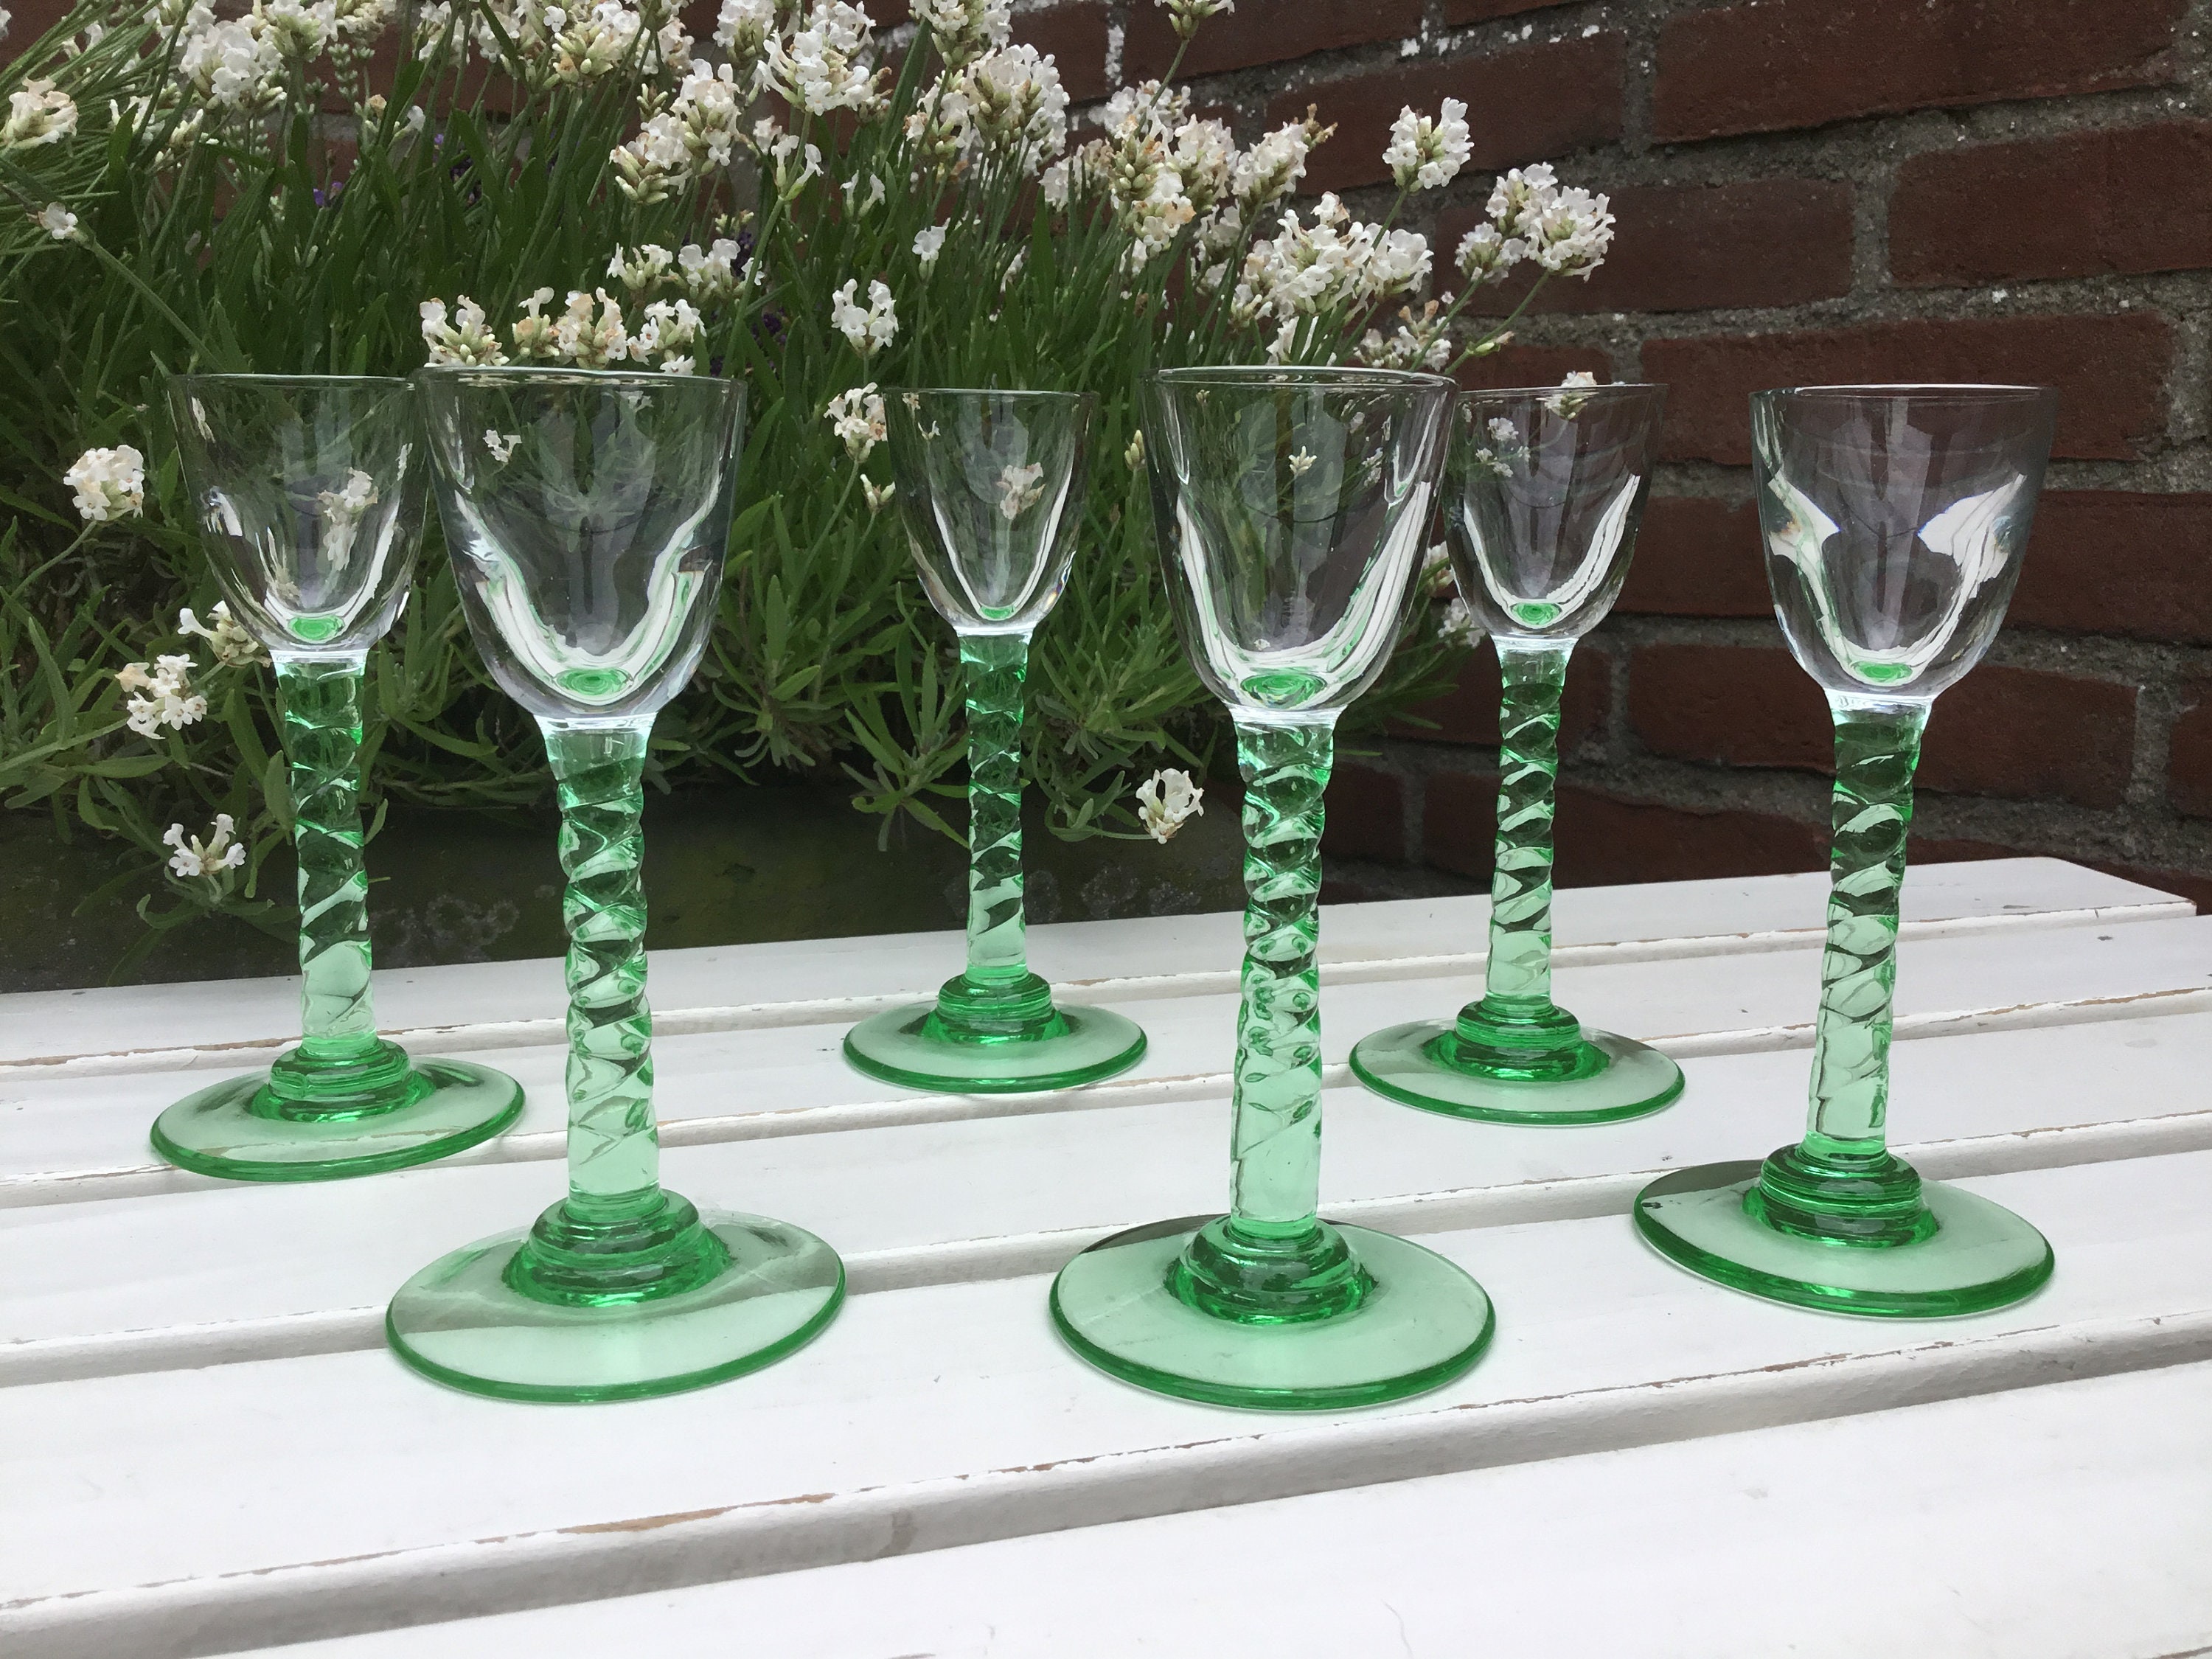 6 Anciens Verres à Martini On The Rocks - Vintage French Finds